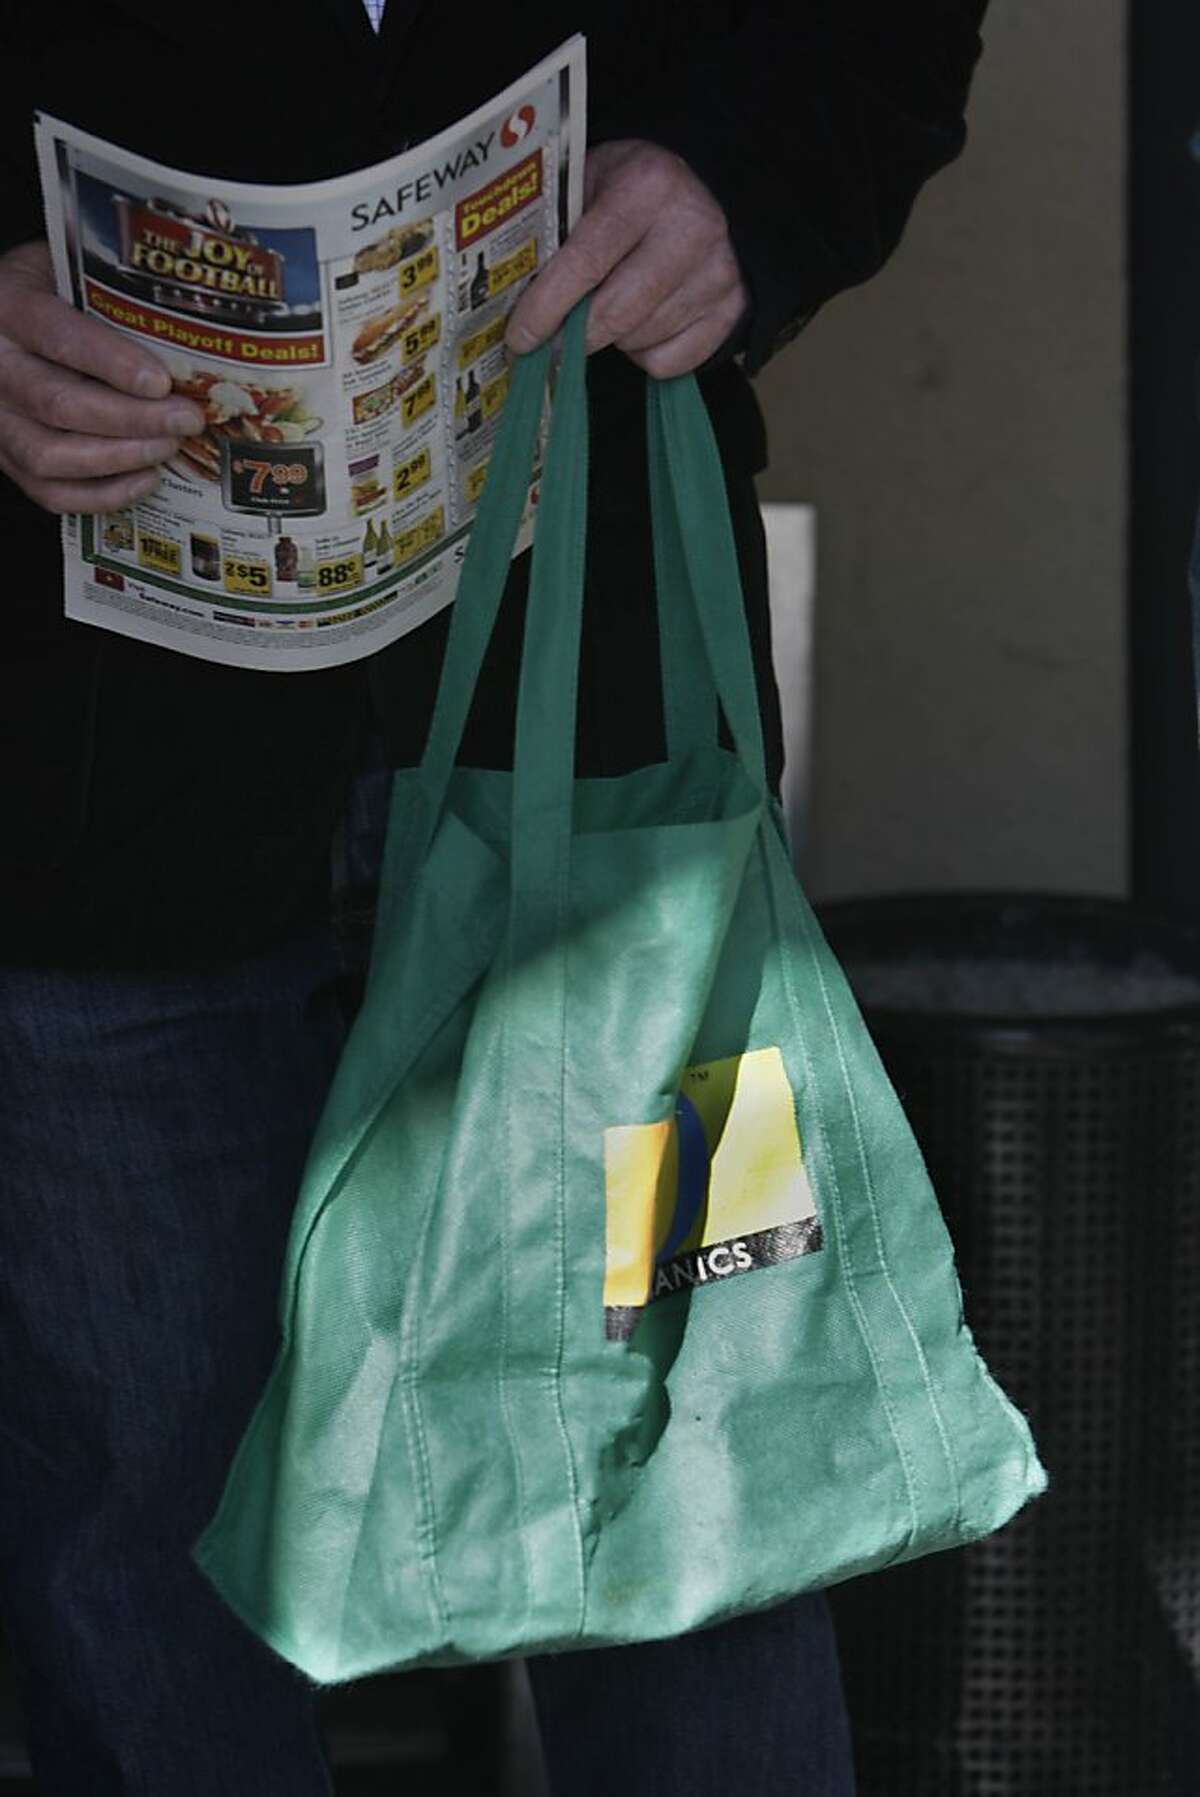 A Safeway reusable bag is seen being used by a shopper on Monday, January 24, 2011 in San Francisco, Calif. Testing by Frontier Global Sciences for the Center for Consumer Freedom (CCF) found that one of Safeway's reusable bags' inserts were found to be high in lead. Ran on: 01-25-2011 Safeway has stopped offering many of the shopping bags.